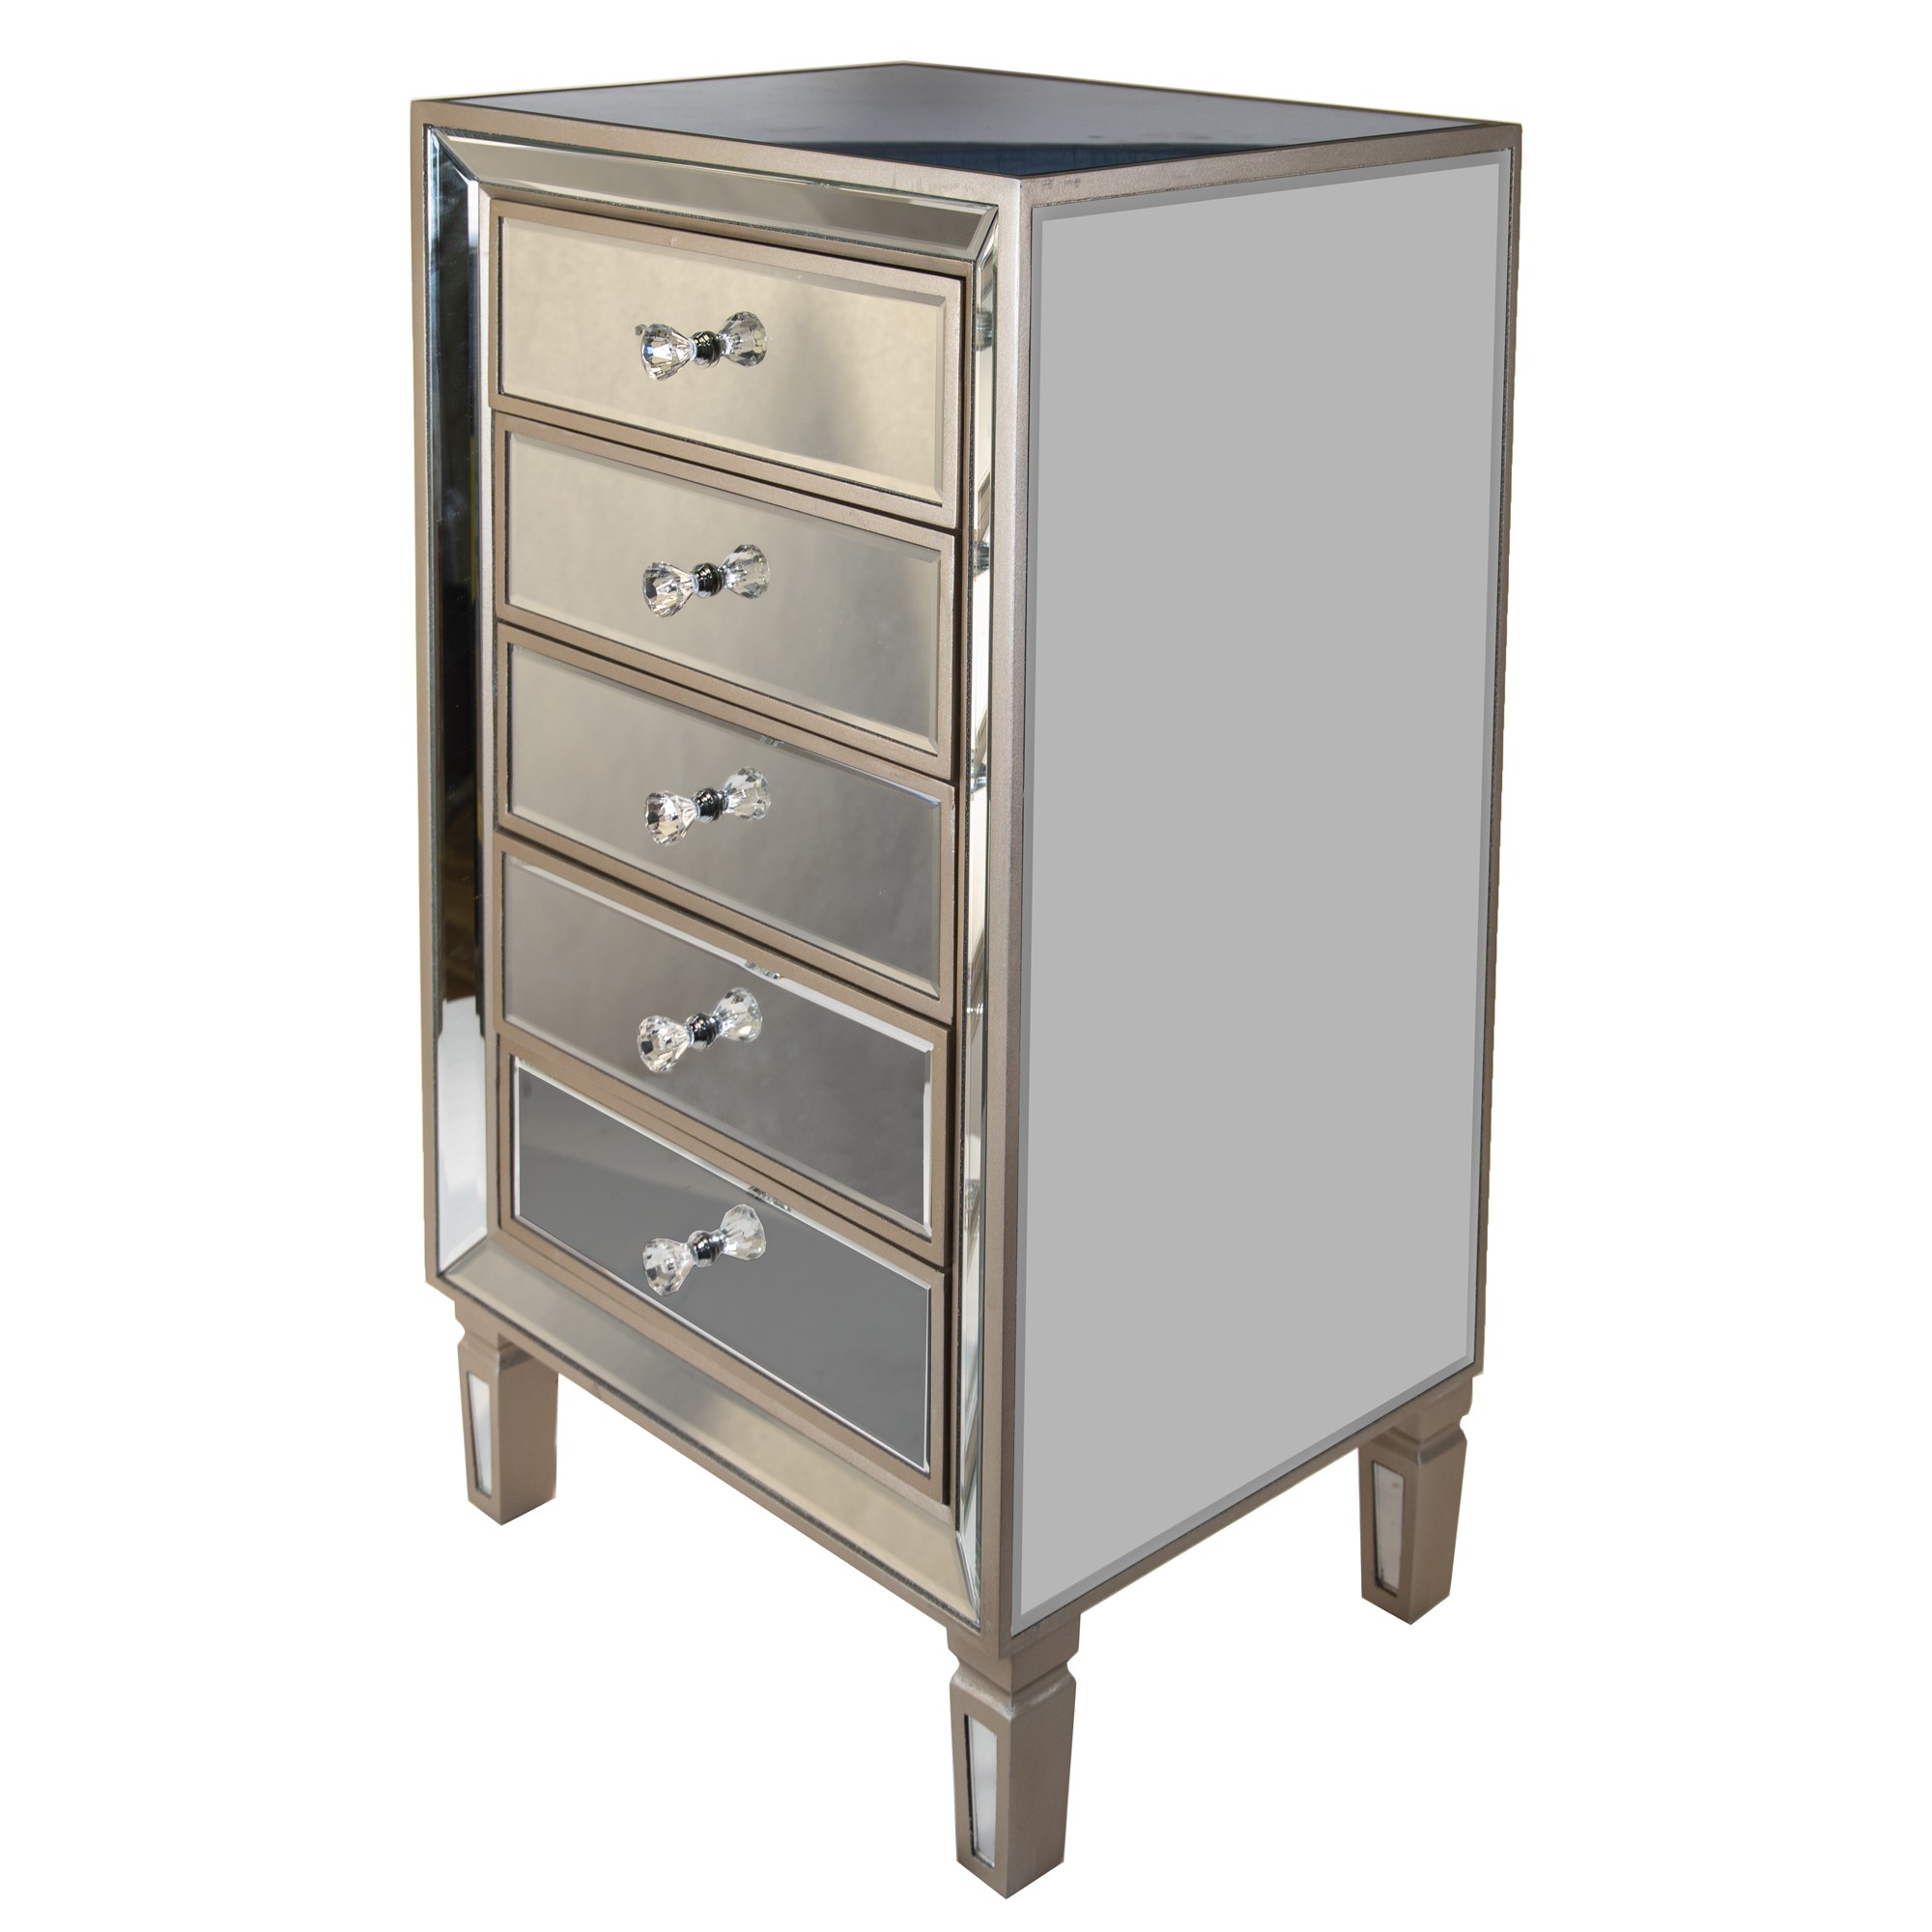 20" X 15.7" X 35.8" Champagne MDF Wood Mirrored Glass Accent Cabinet with Drawers and a Formal Mirror Trim